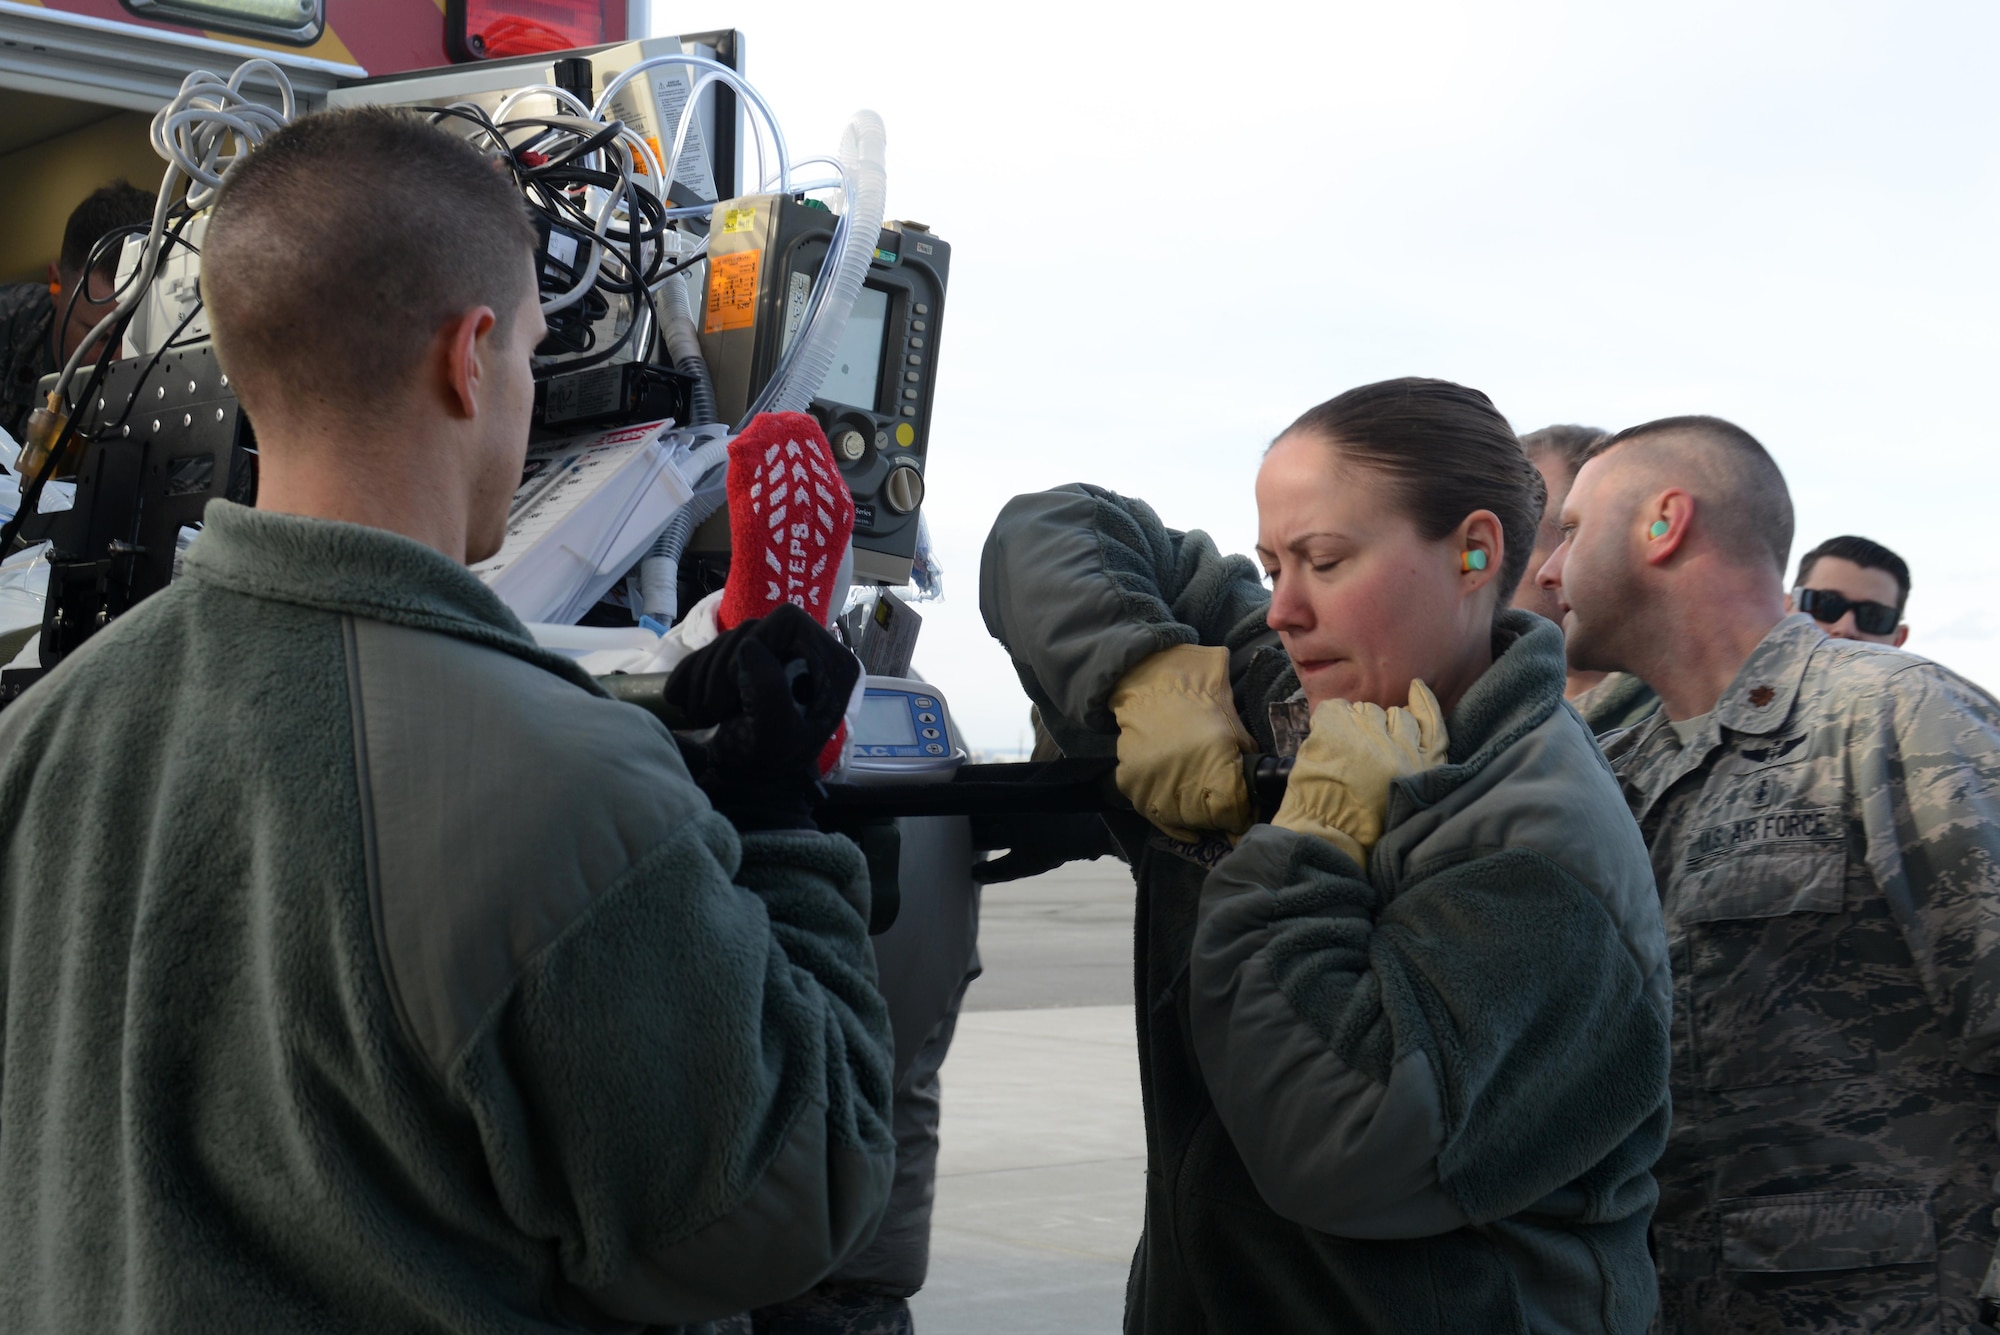 Technical Sgt. Ashley Jackson and other 673d Medical Group Airmen lift a simulated patient and a continuous positive airway pressure machine during the EnRoute Patient Staging System exercise at Joint Base Elmendorf-Richardson, Alaska, April 3, 2017. The ERPSS provides patient reception and limited emergent intervention, and ensures patients are medically and administratively prepared for flight in a safe and timely aeromedical evacuation.